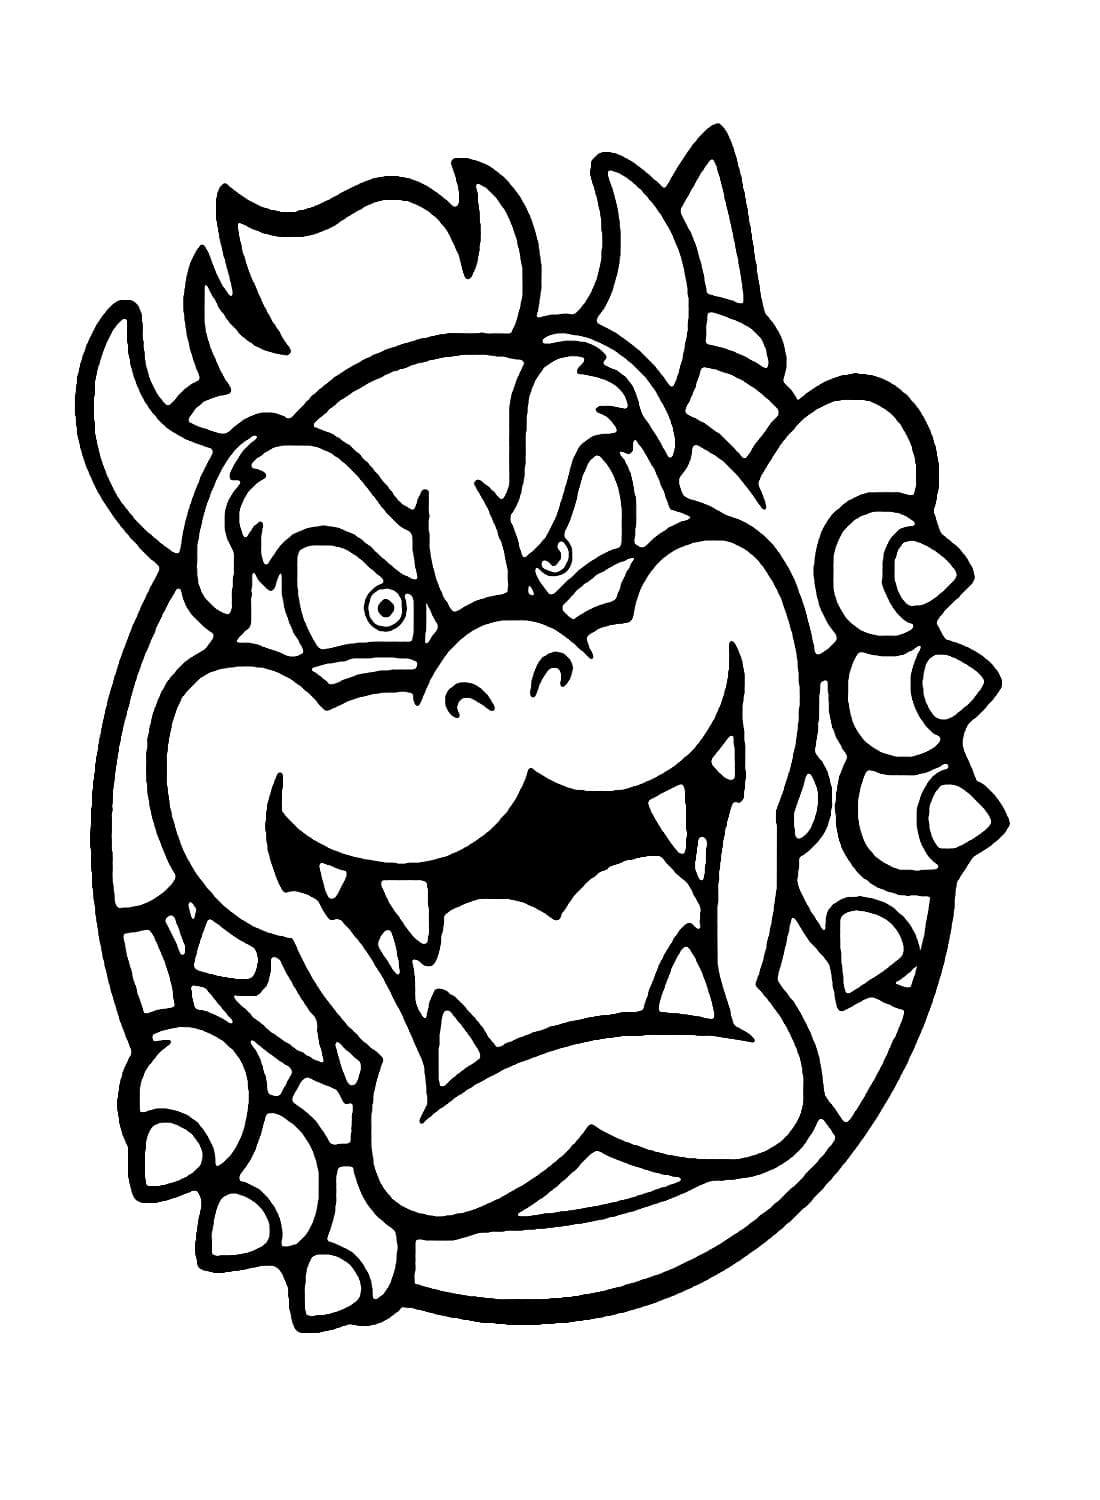 how to draw bowsers face